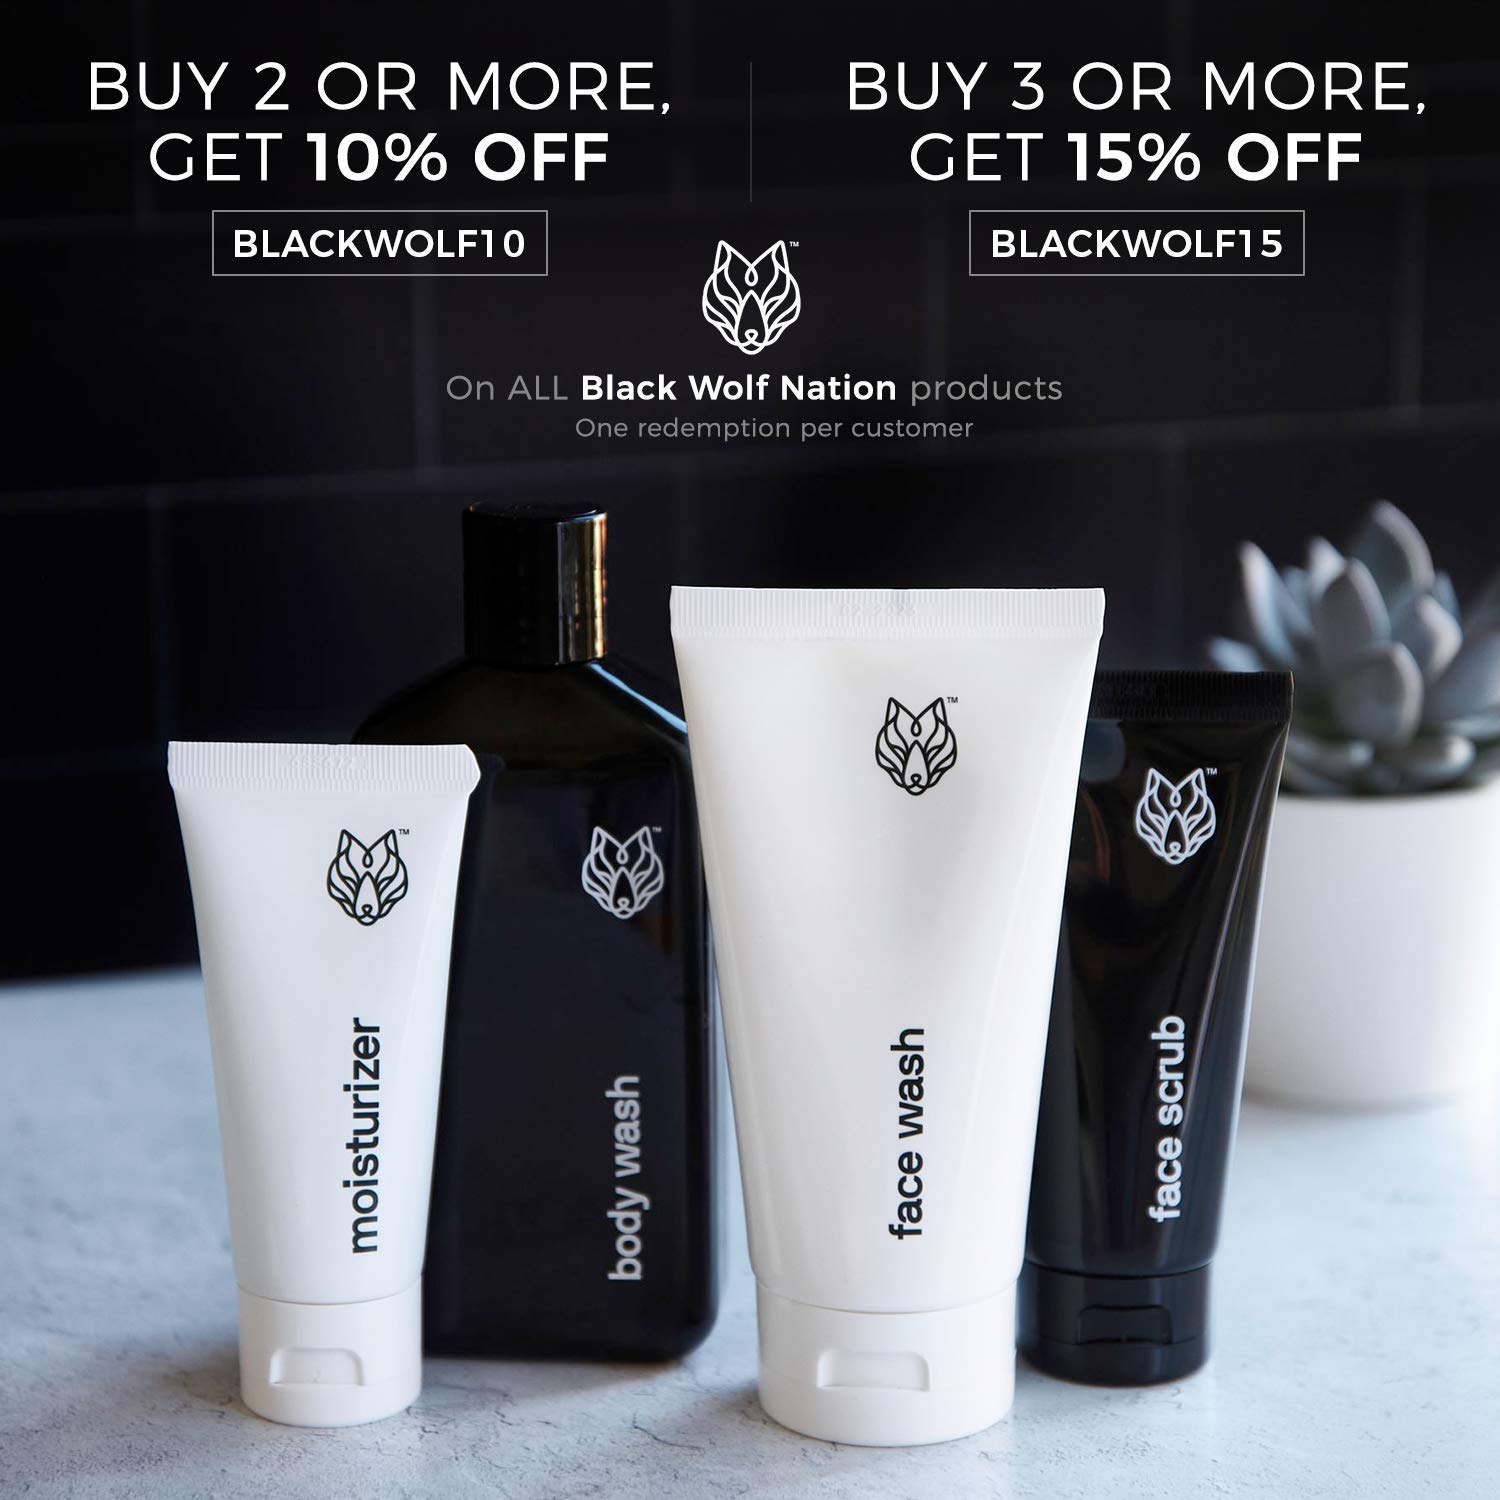 Black Wolf Shower Bundle for Oily Skin - 4pc Bundle- Includes Body Wash, Face Wash, Facial Scrub and Oil-Free Moisturize- Charcoal Powder and Salicylic Acid Reduce Acne Breakouts and Cleanse Your Skin